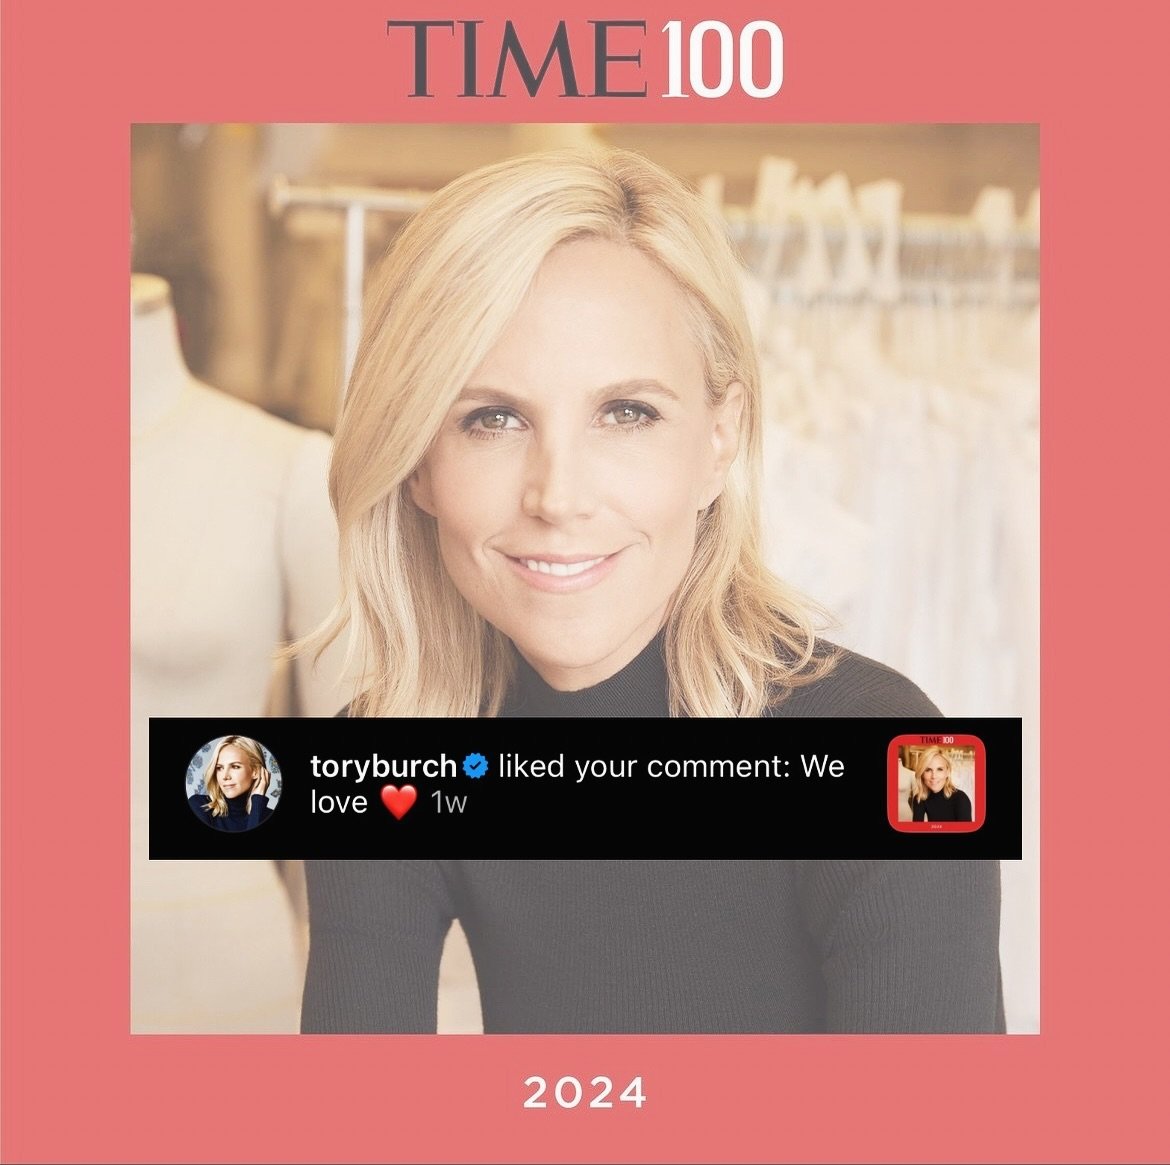 Special shoutout to @toryburch who&rsquo;s been honor @time. She&rsquo;s an icon, mogul, and the queen of branding!! 

#toryburch #time #honor #womenwear #sportswear #branding #marketing #kztinc